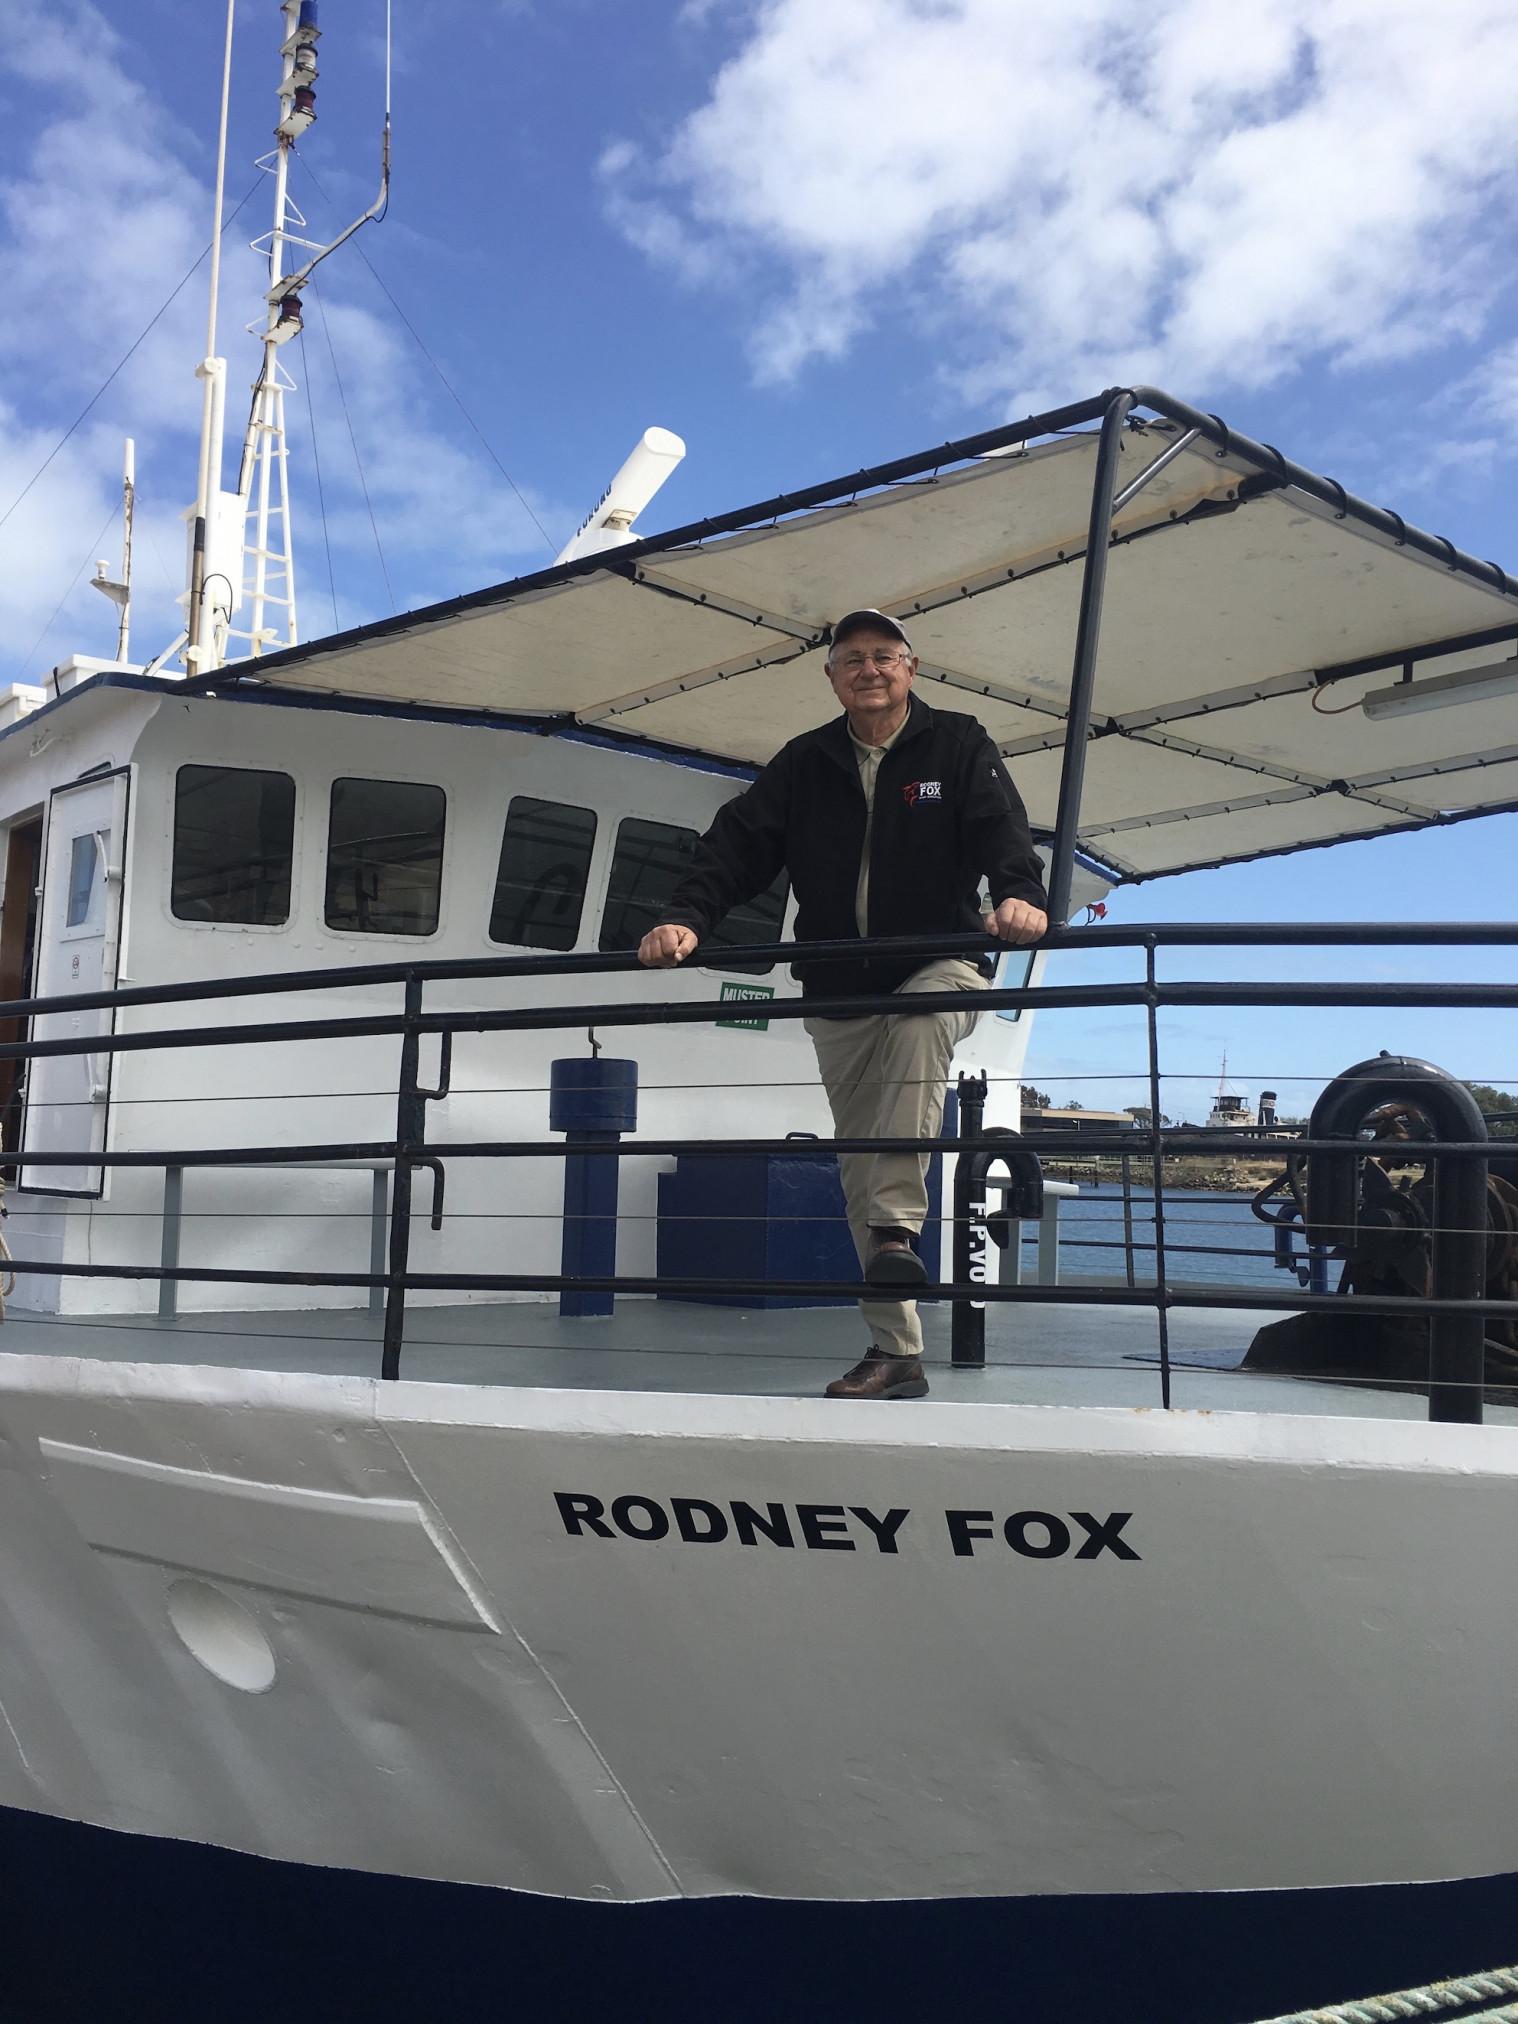 Rodney Fox standing on his Boat